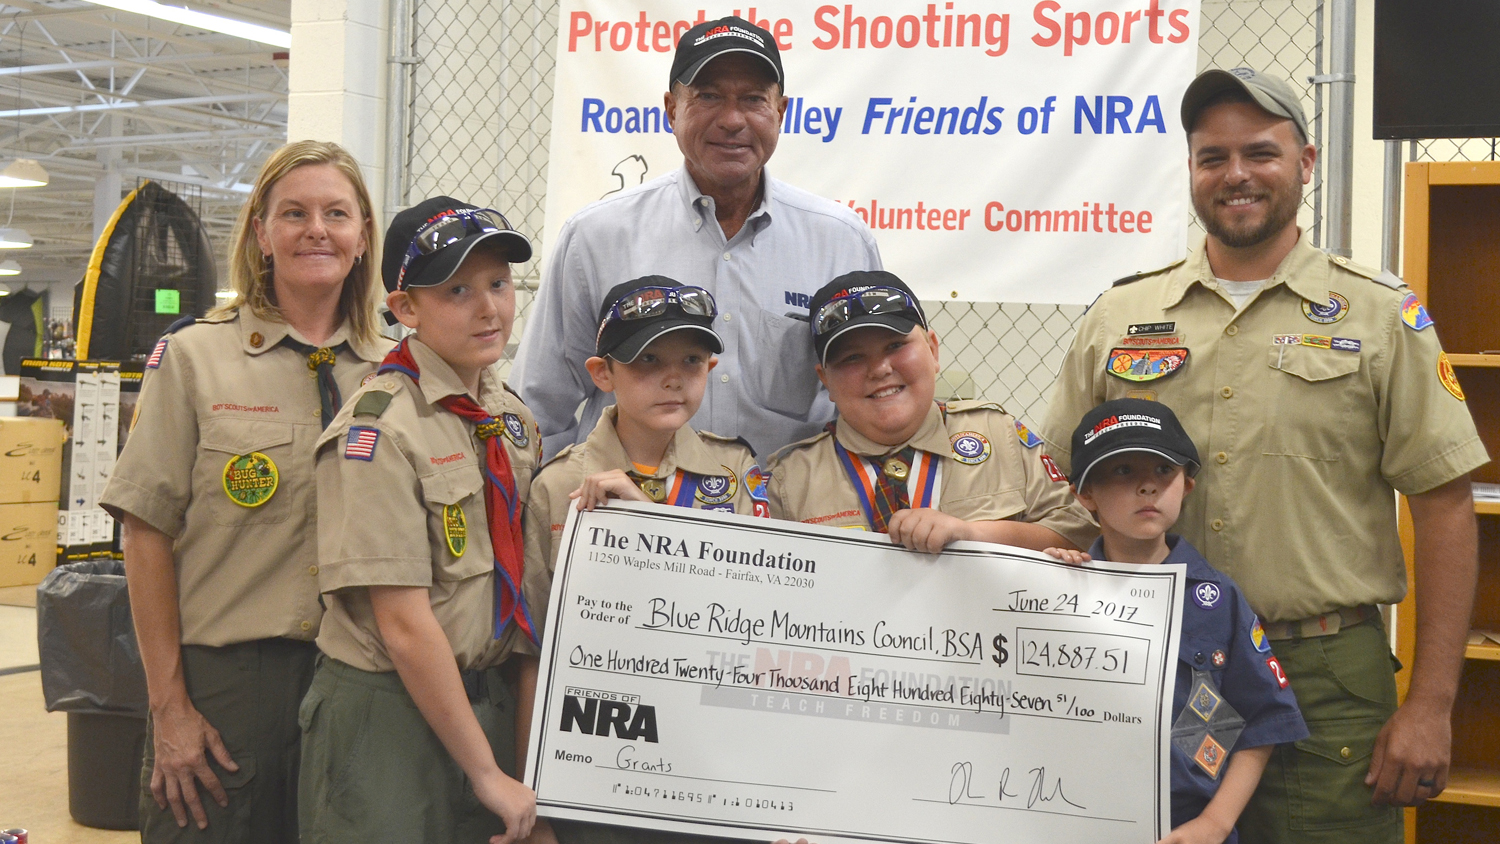 Big Checks Represent Big Support For The Shooting Sports In Roanoke, Virginia 